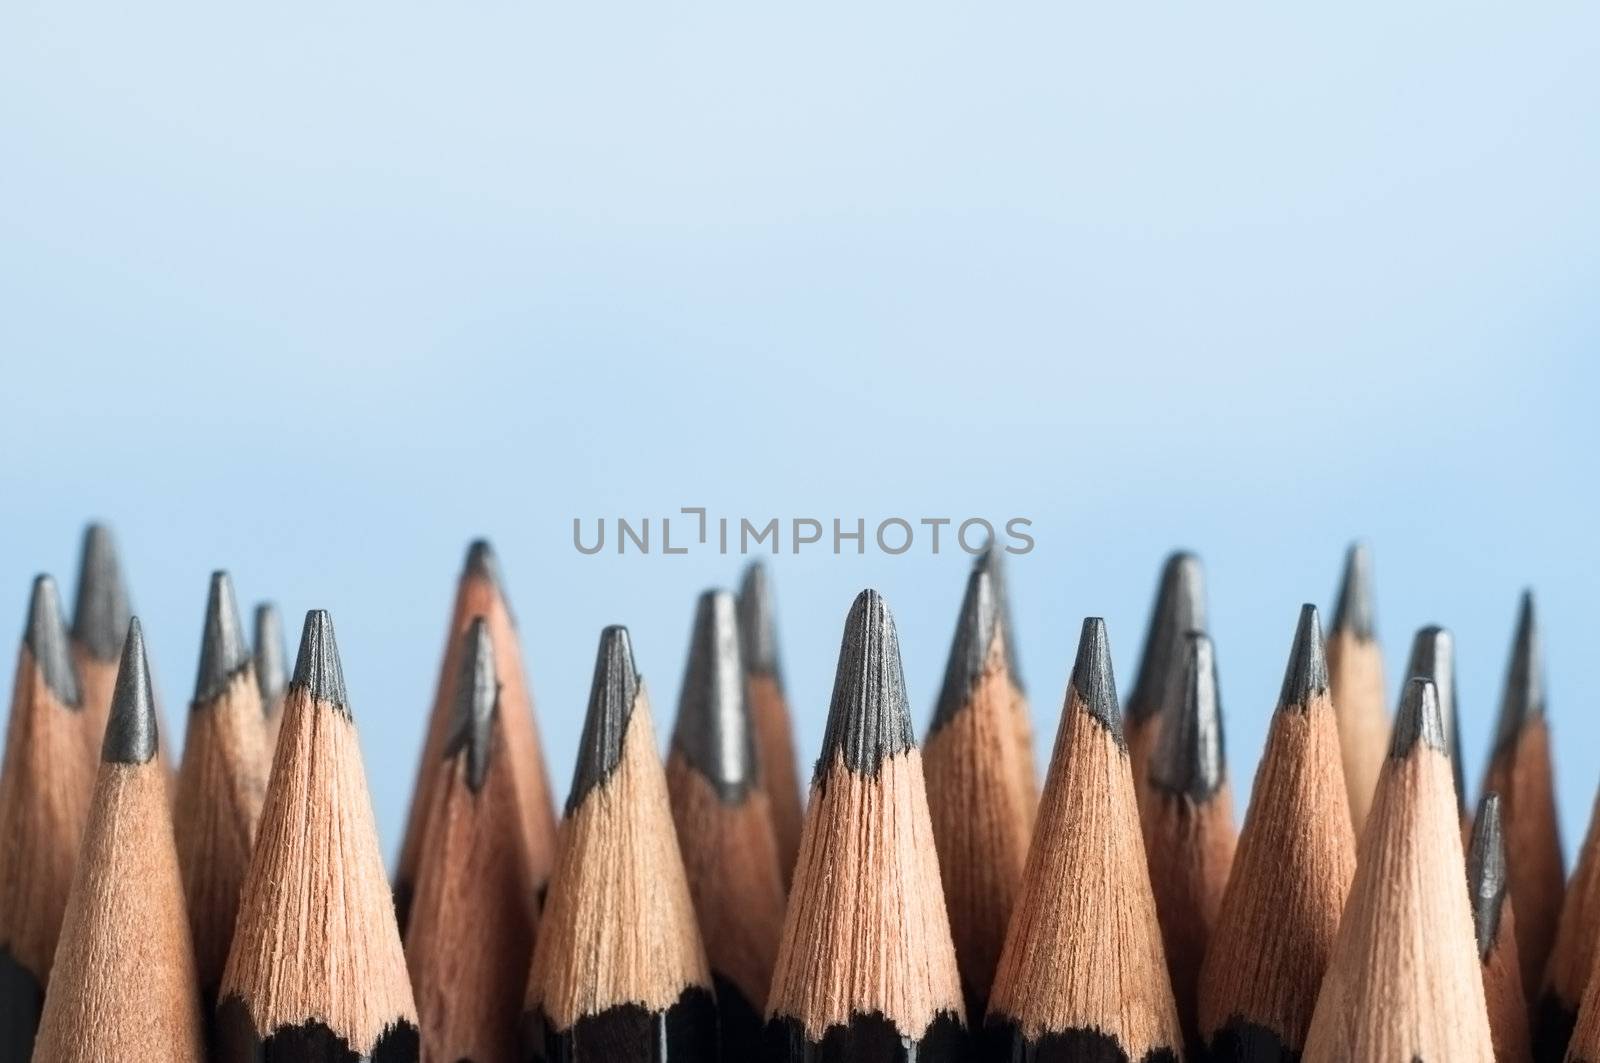 Upright Graphite Pencils by frannyanne